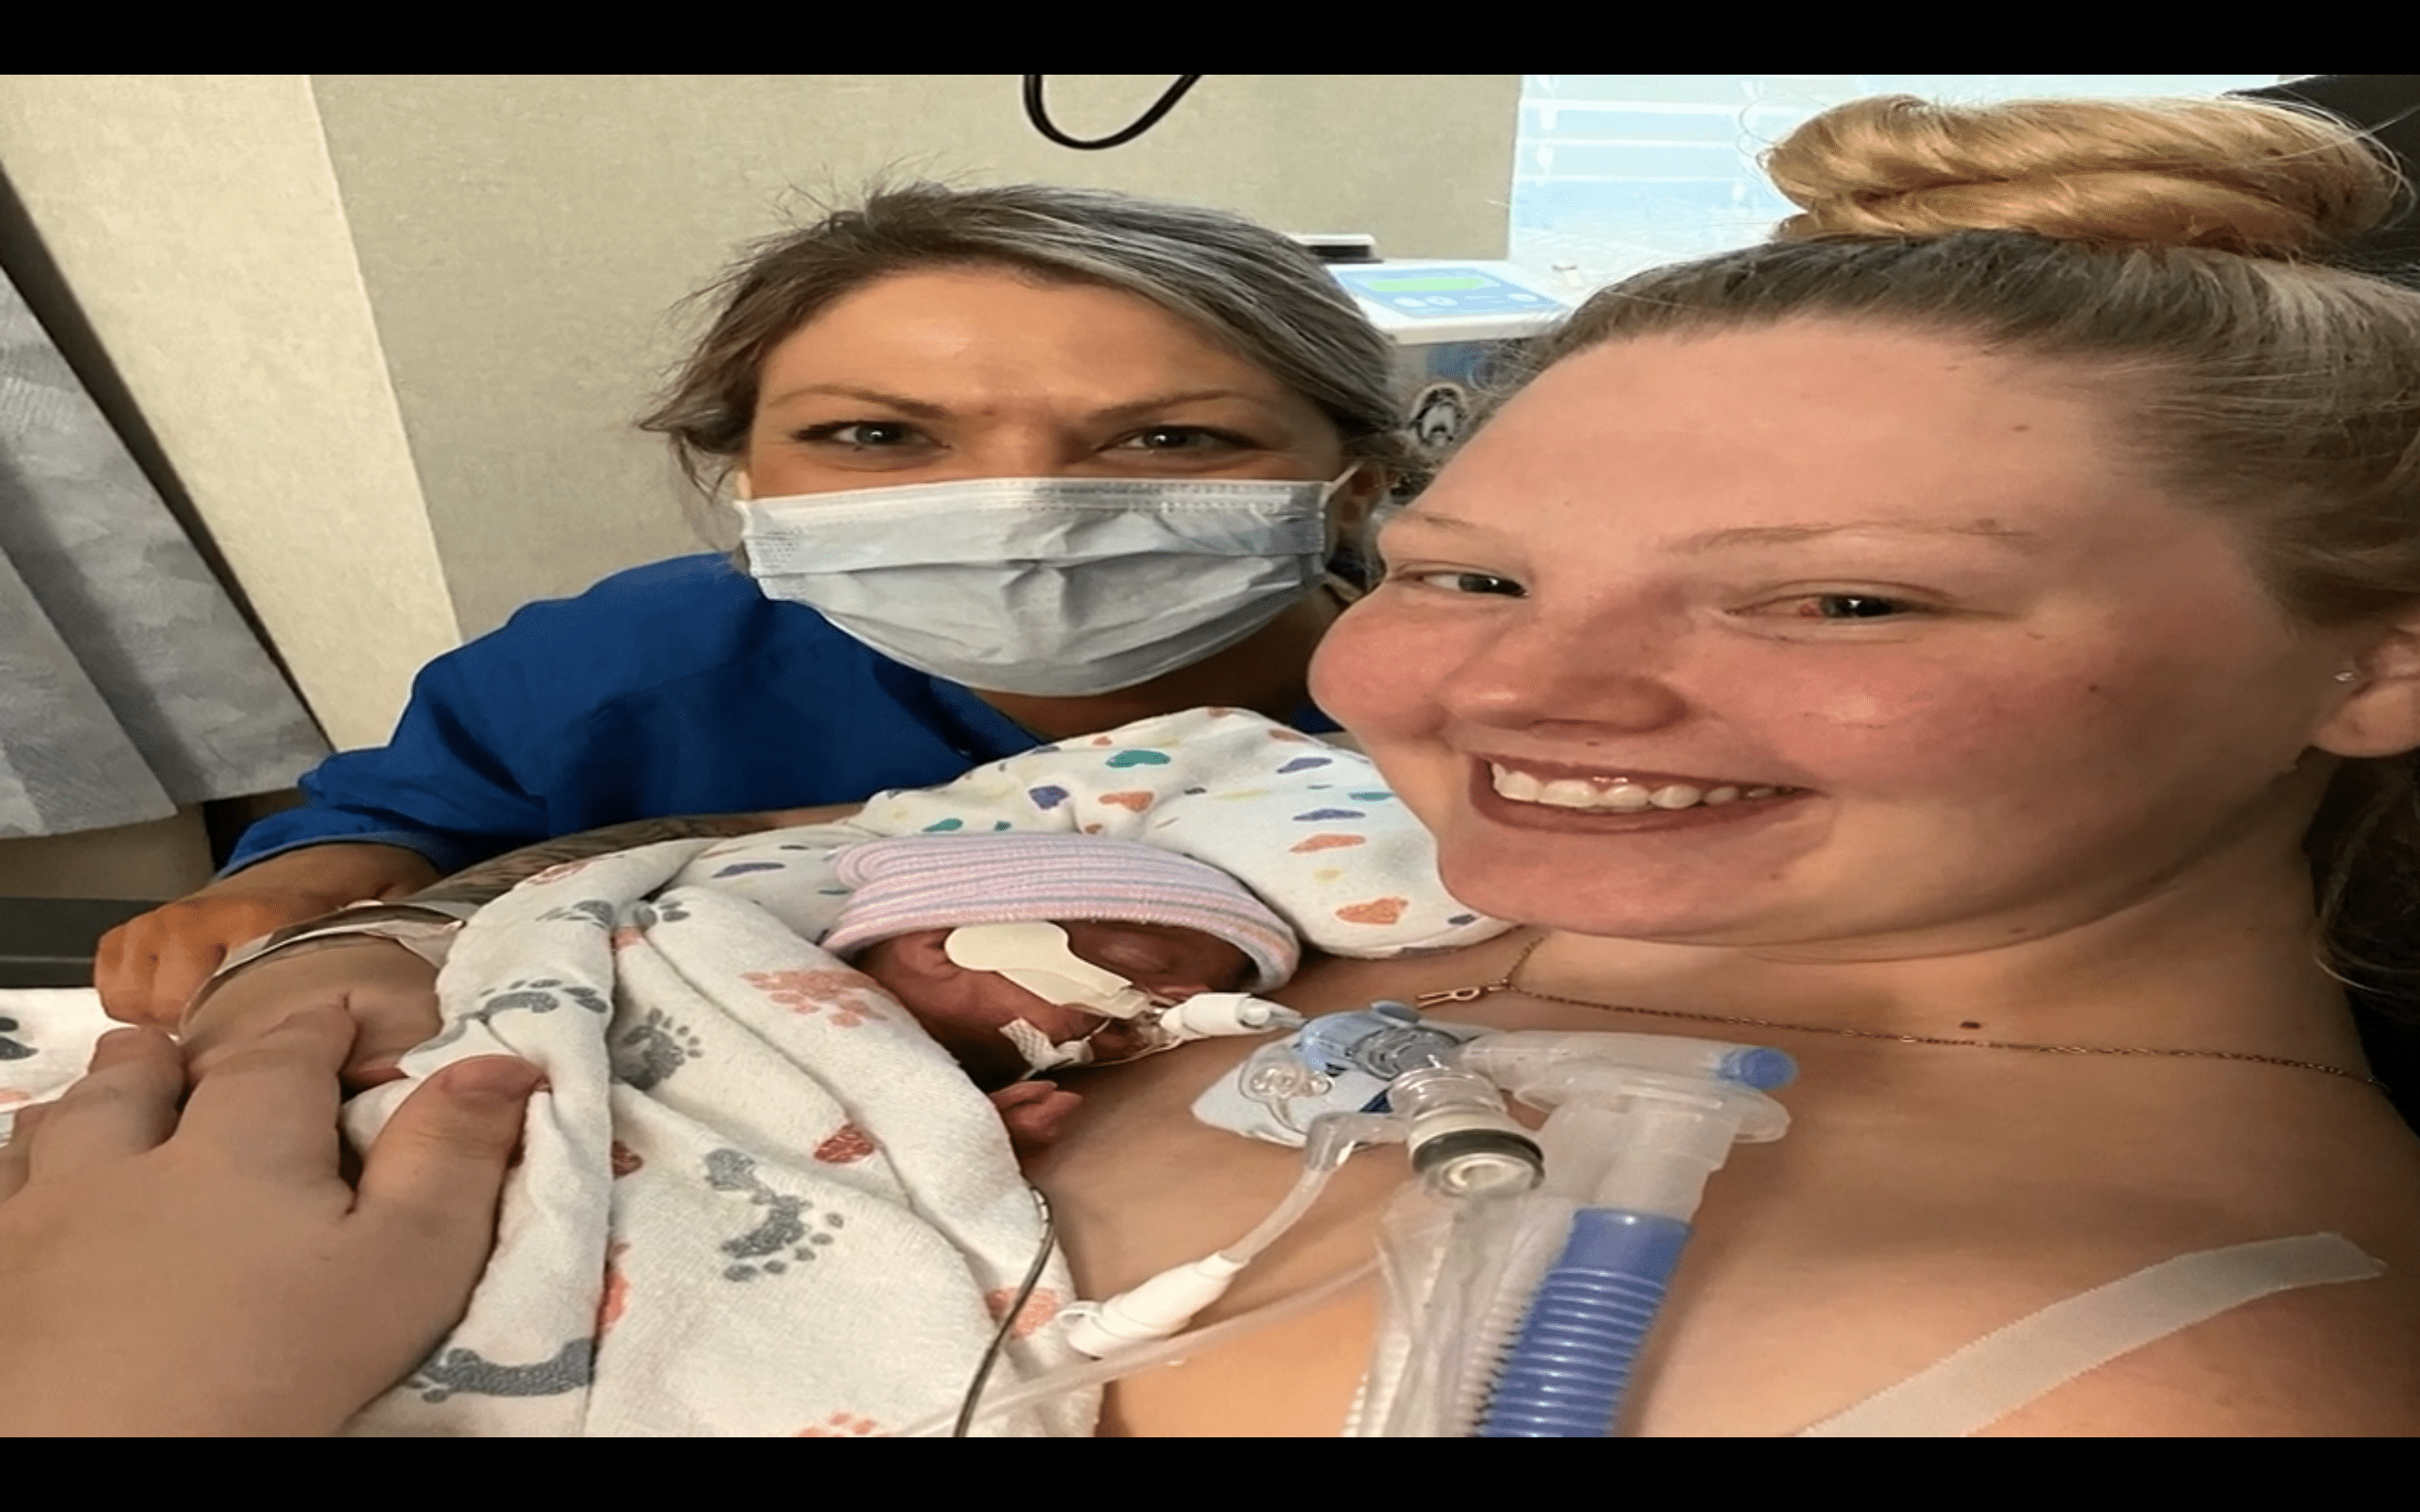 Mom smiling carrying her premature baby with a nurse next to her. | Photo: YouTube/Rizzbag